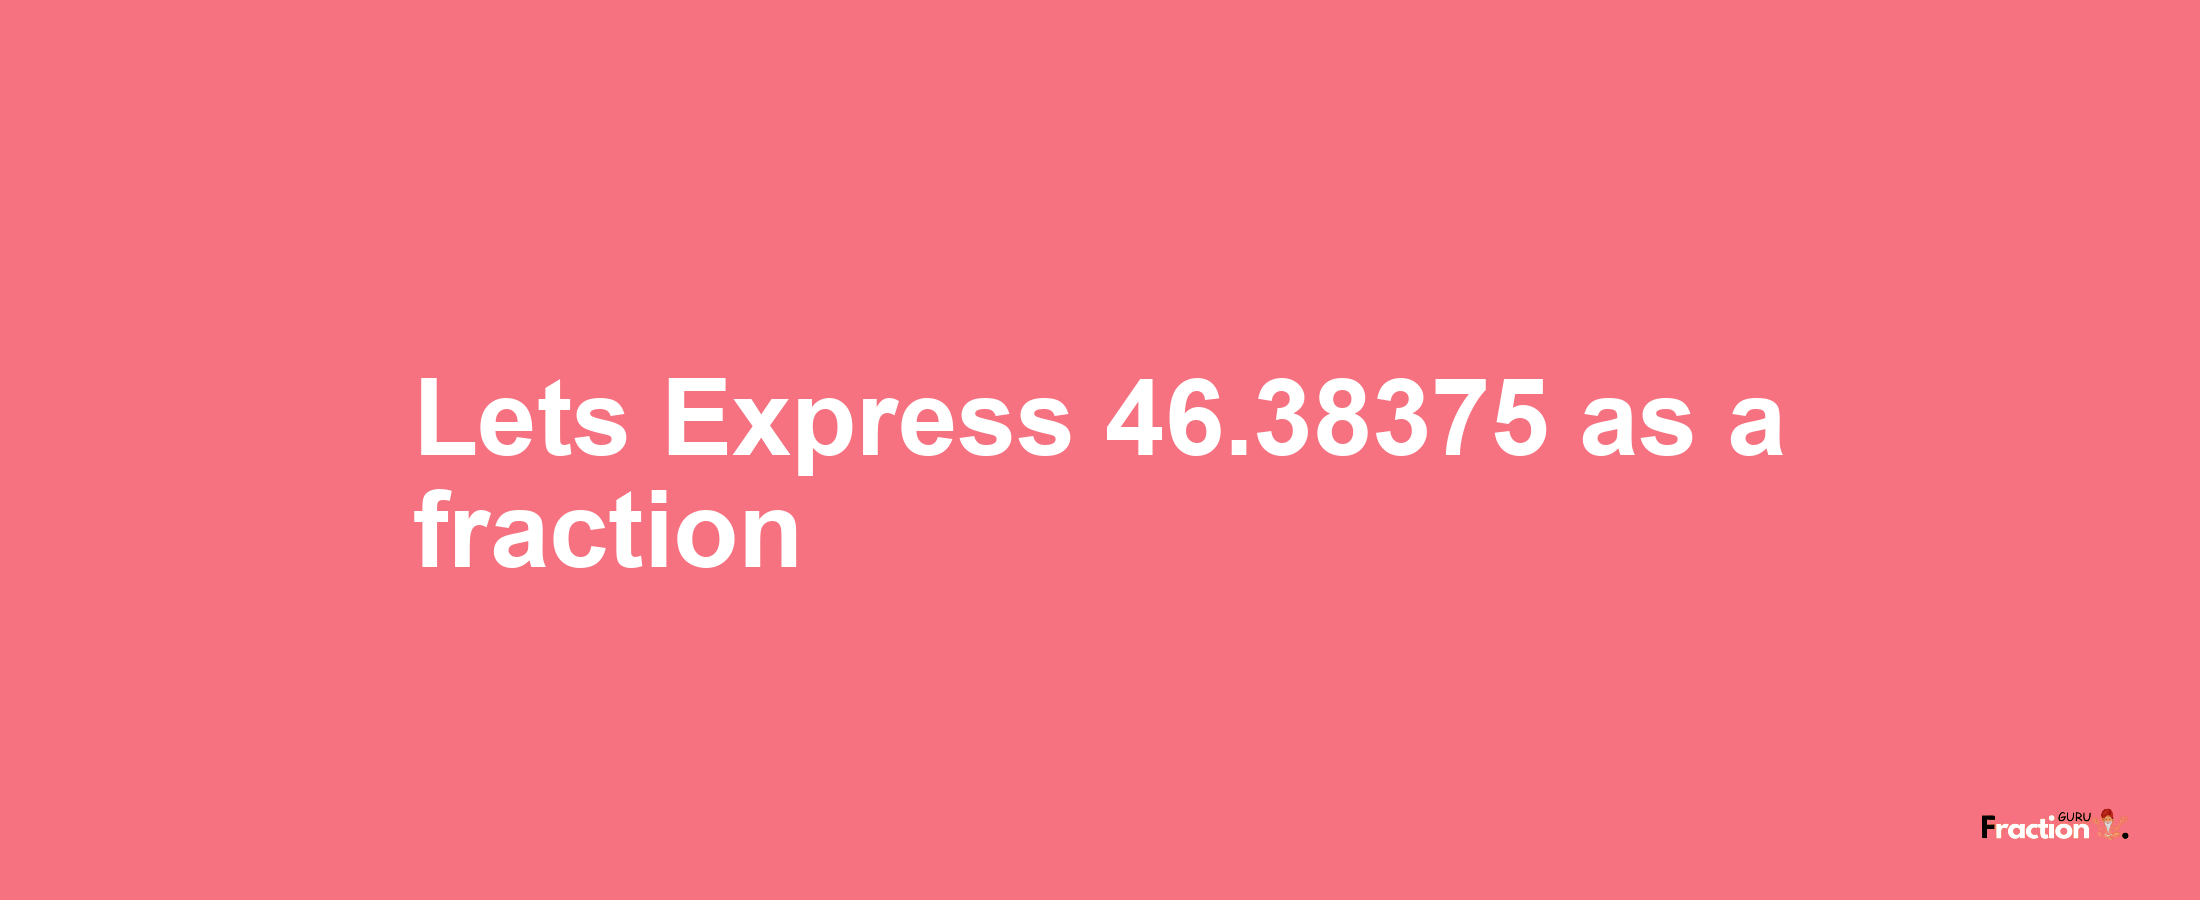 Lets Express 46.38375 as afraction